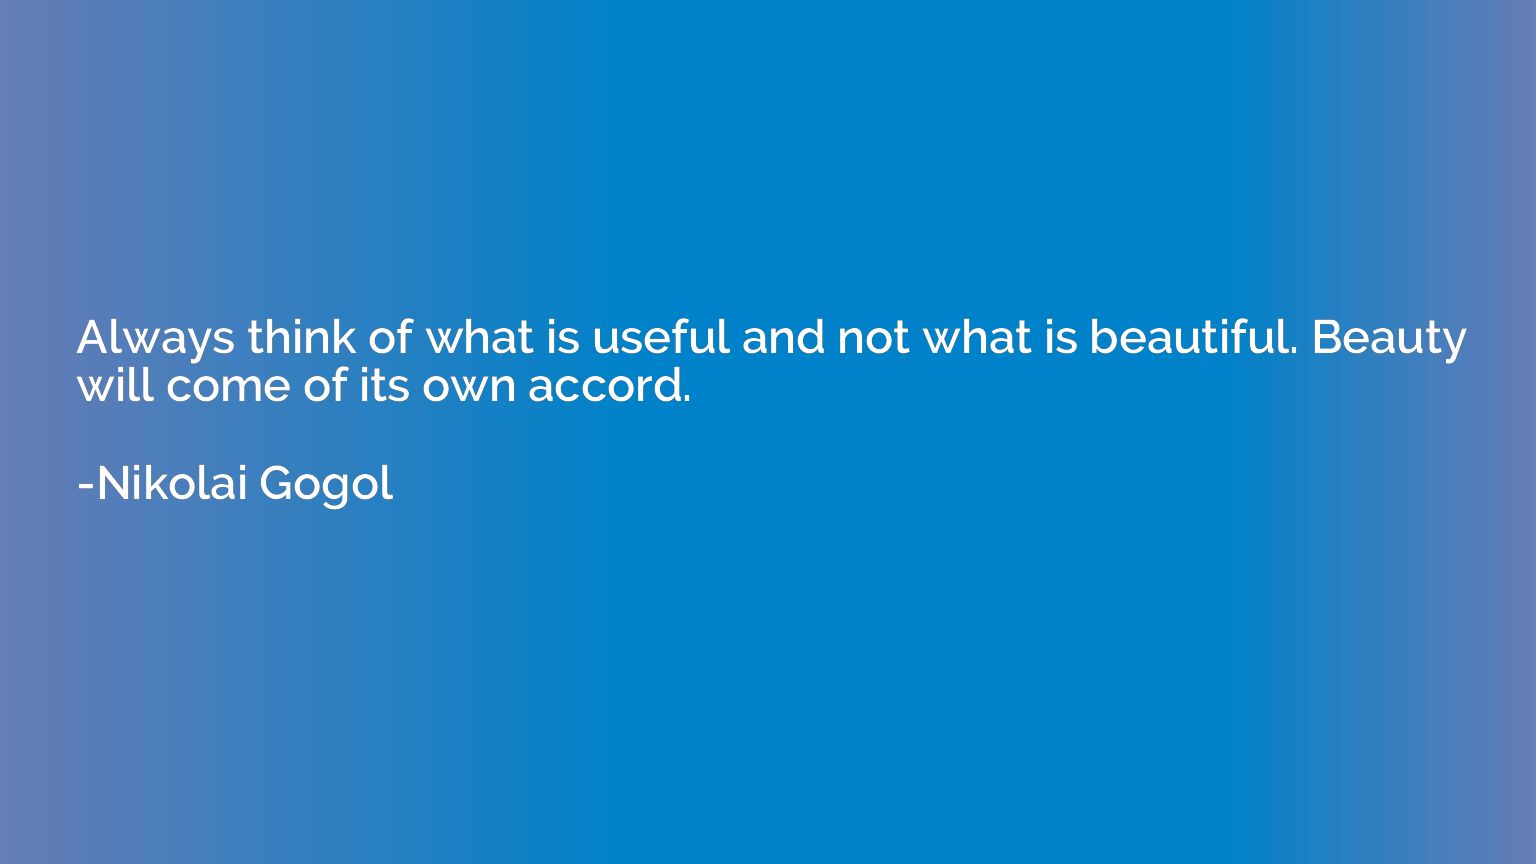 Always think of what is useful and not what is beautiful. Be